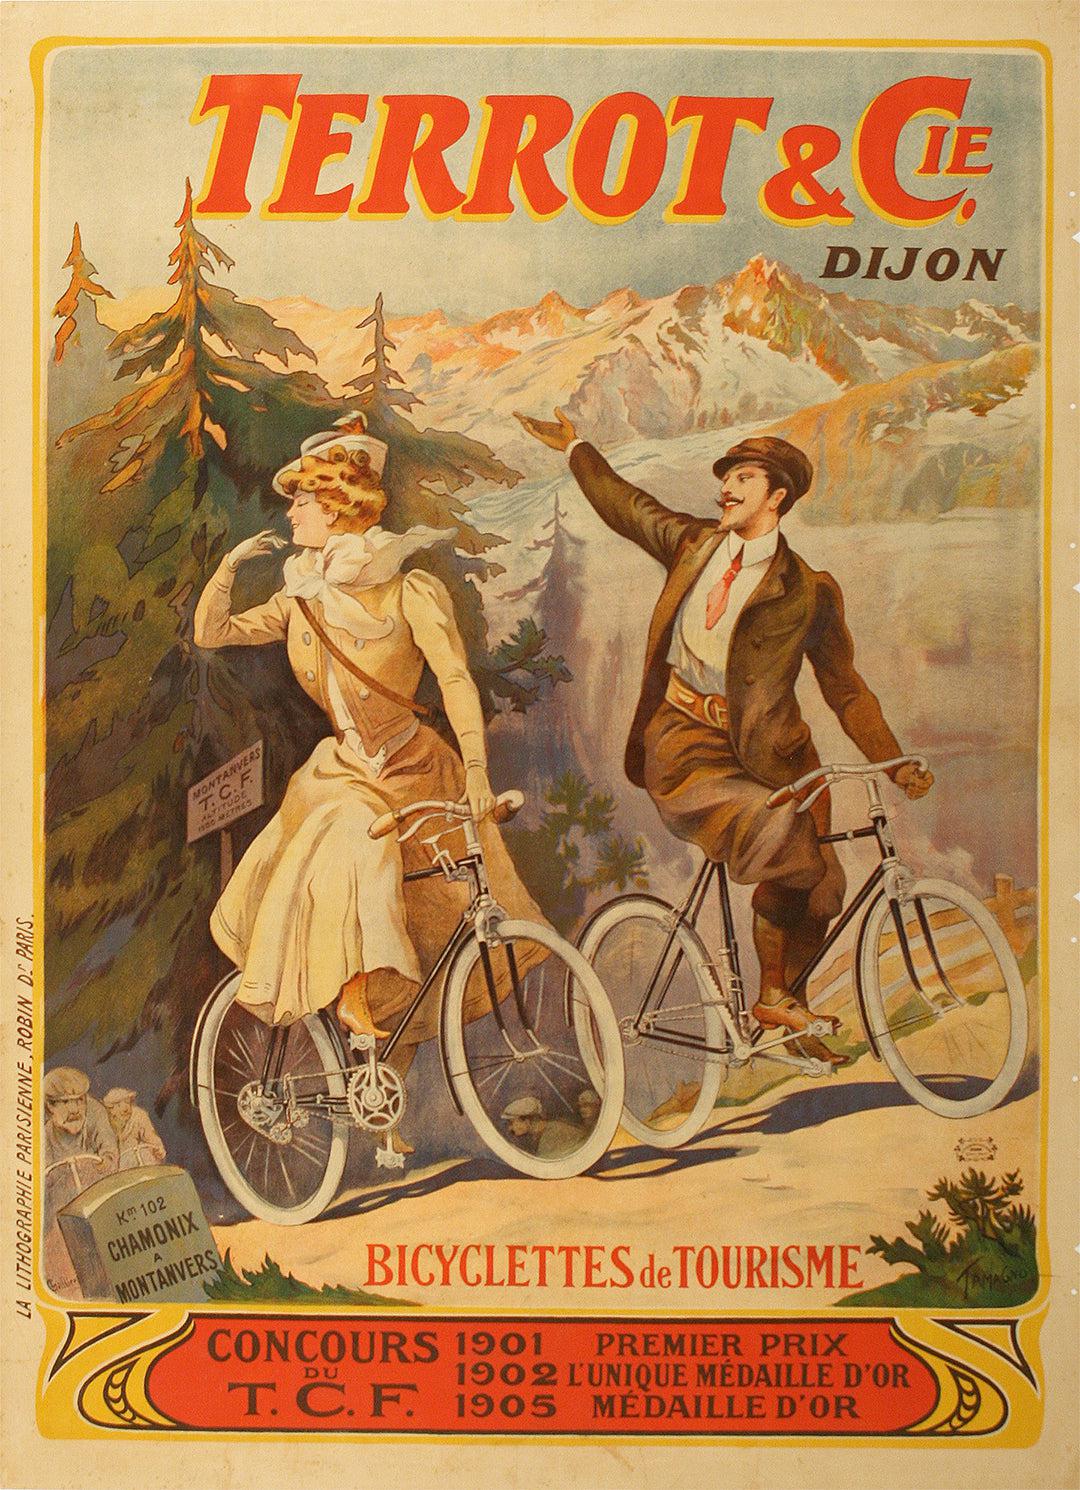 Original Vintage Cycling Poster Terrot et Cie Dijon by Tamagno 1905 Bicycles